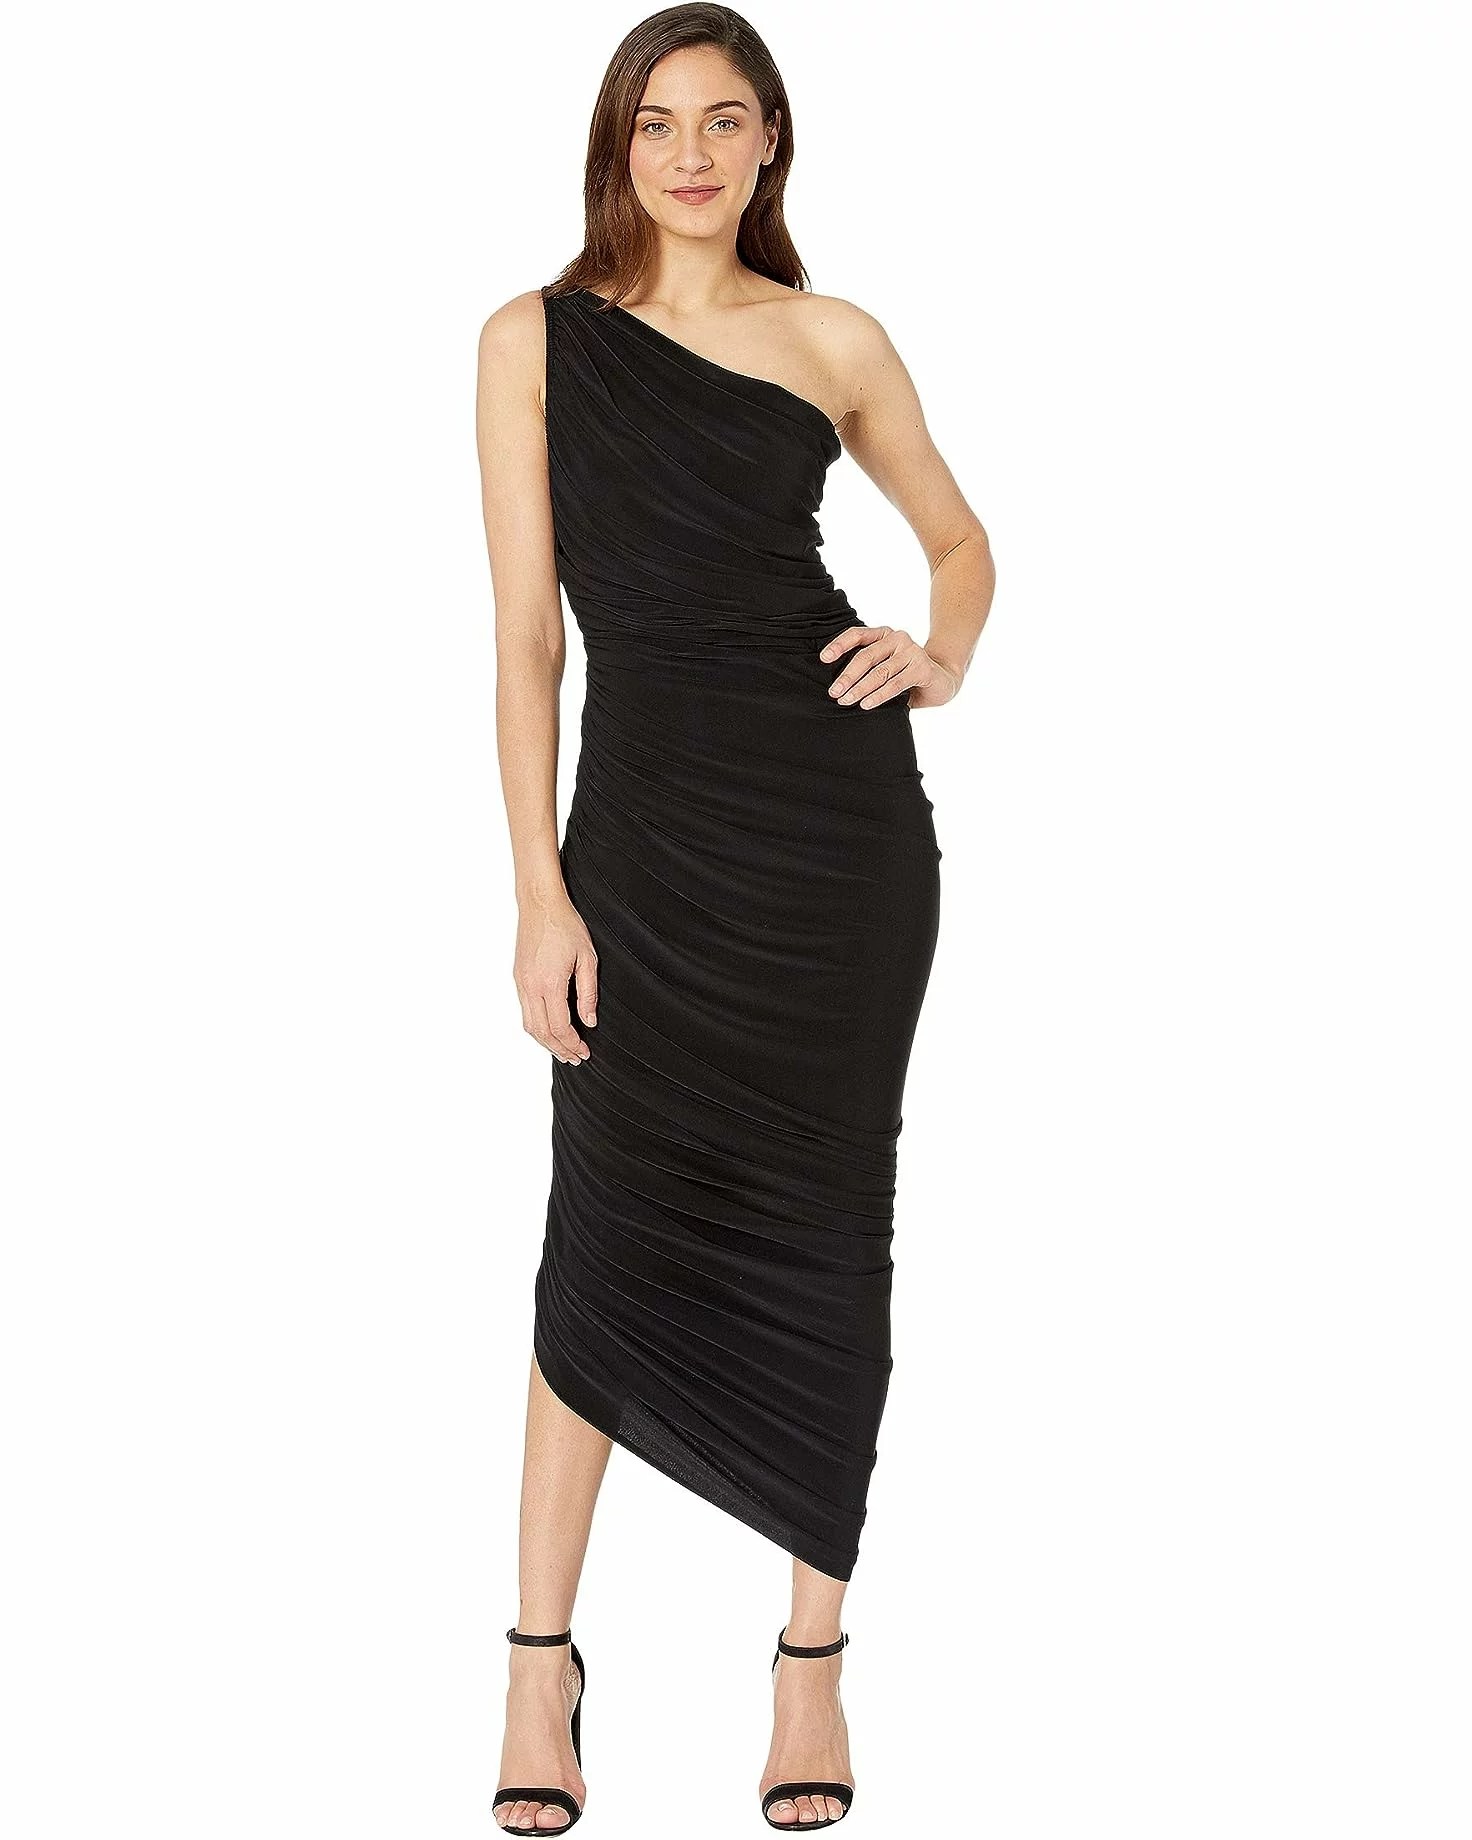 The Norma Kamali Diana Gown Is Leggings in Dress Form | Well+Good